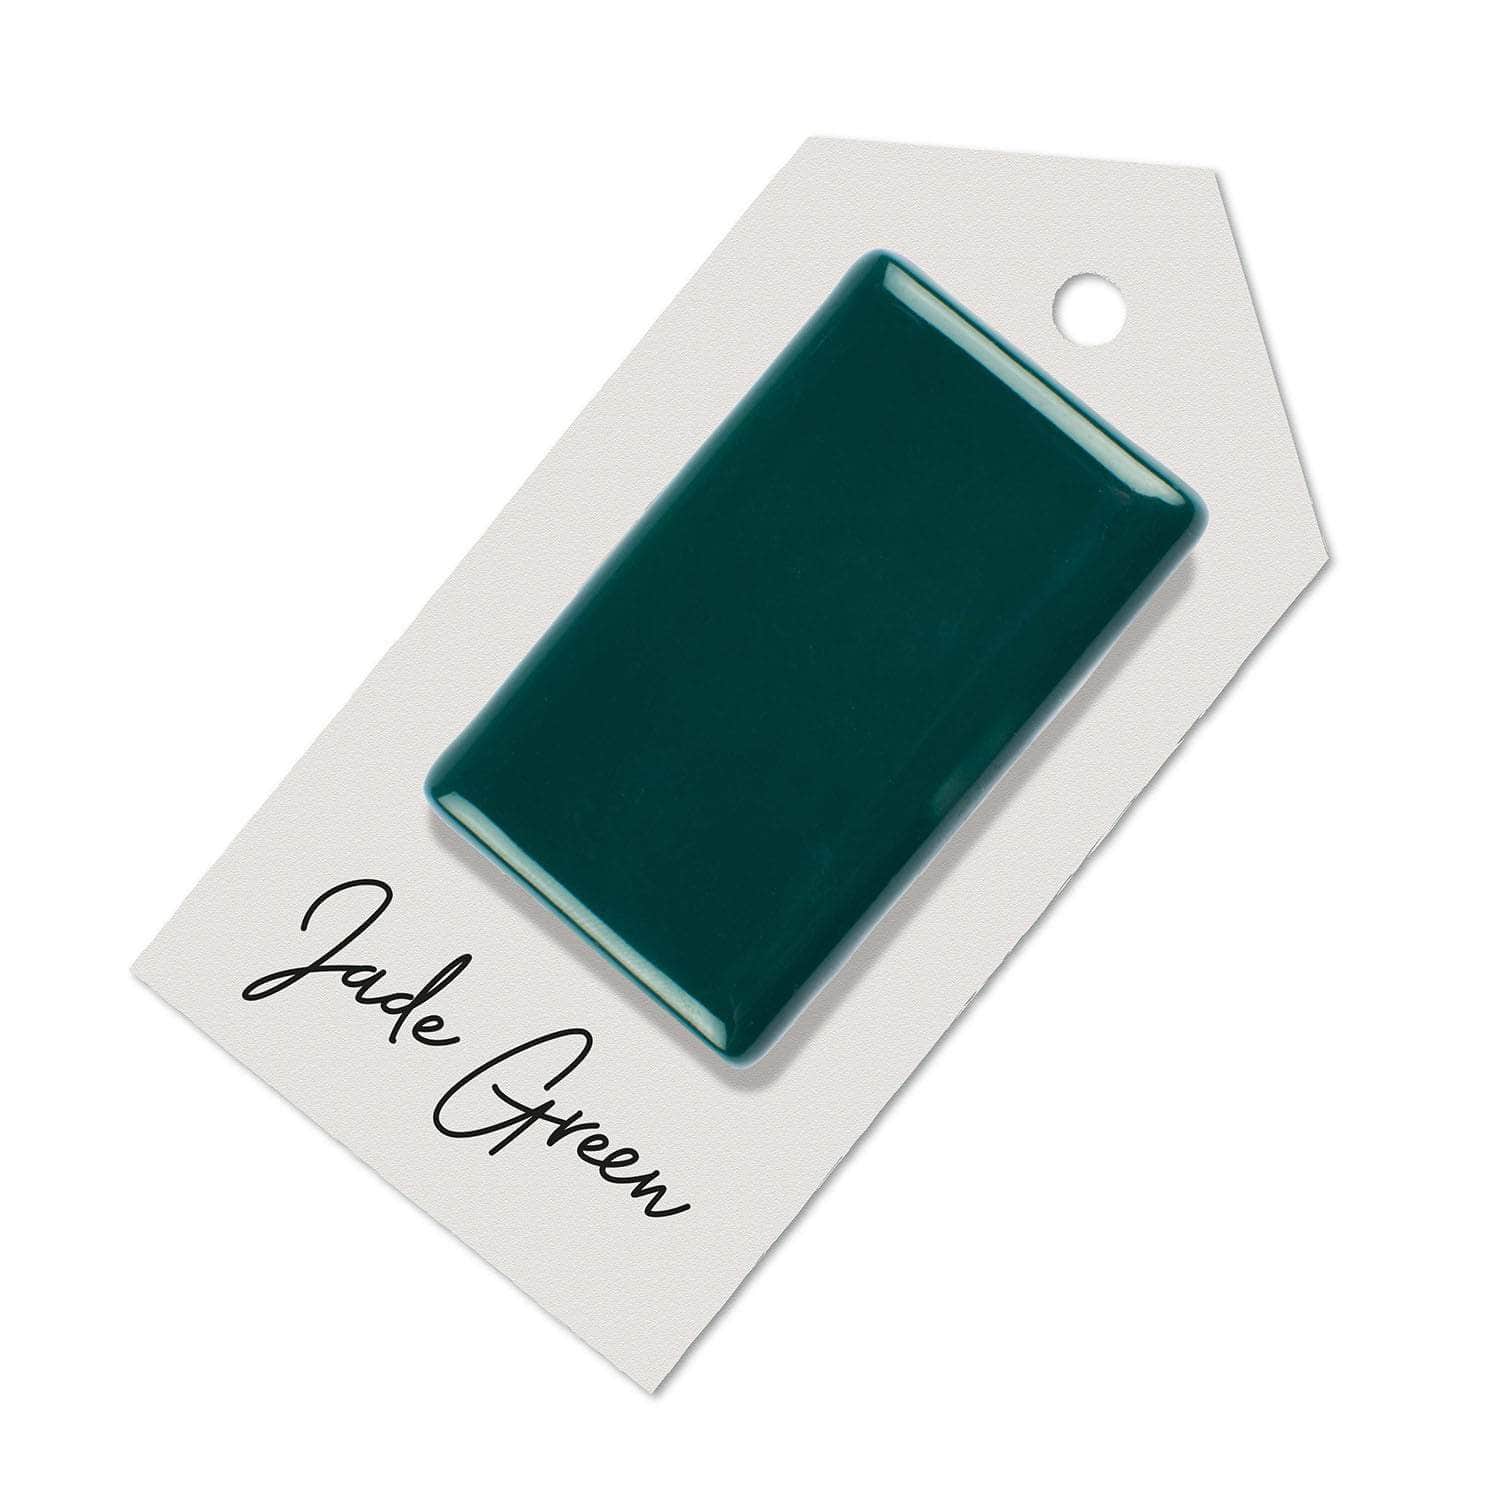 Jade Green sample for Aga range cooker re-enamelling & reconditioned cookers